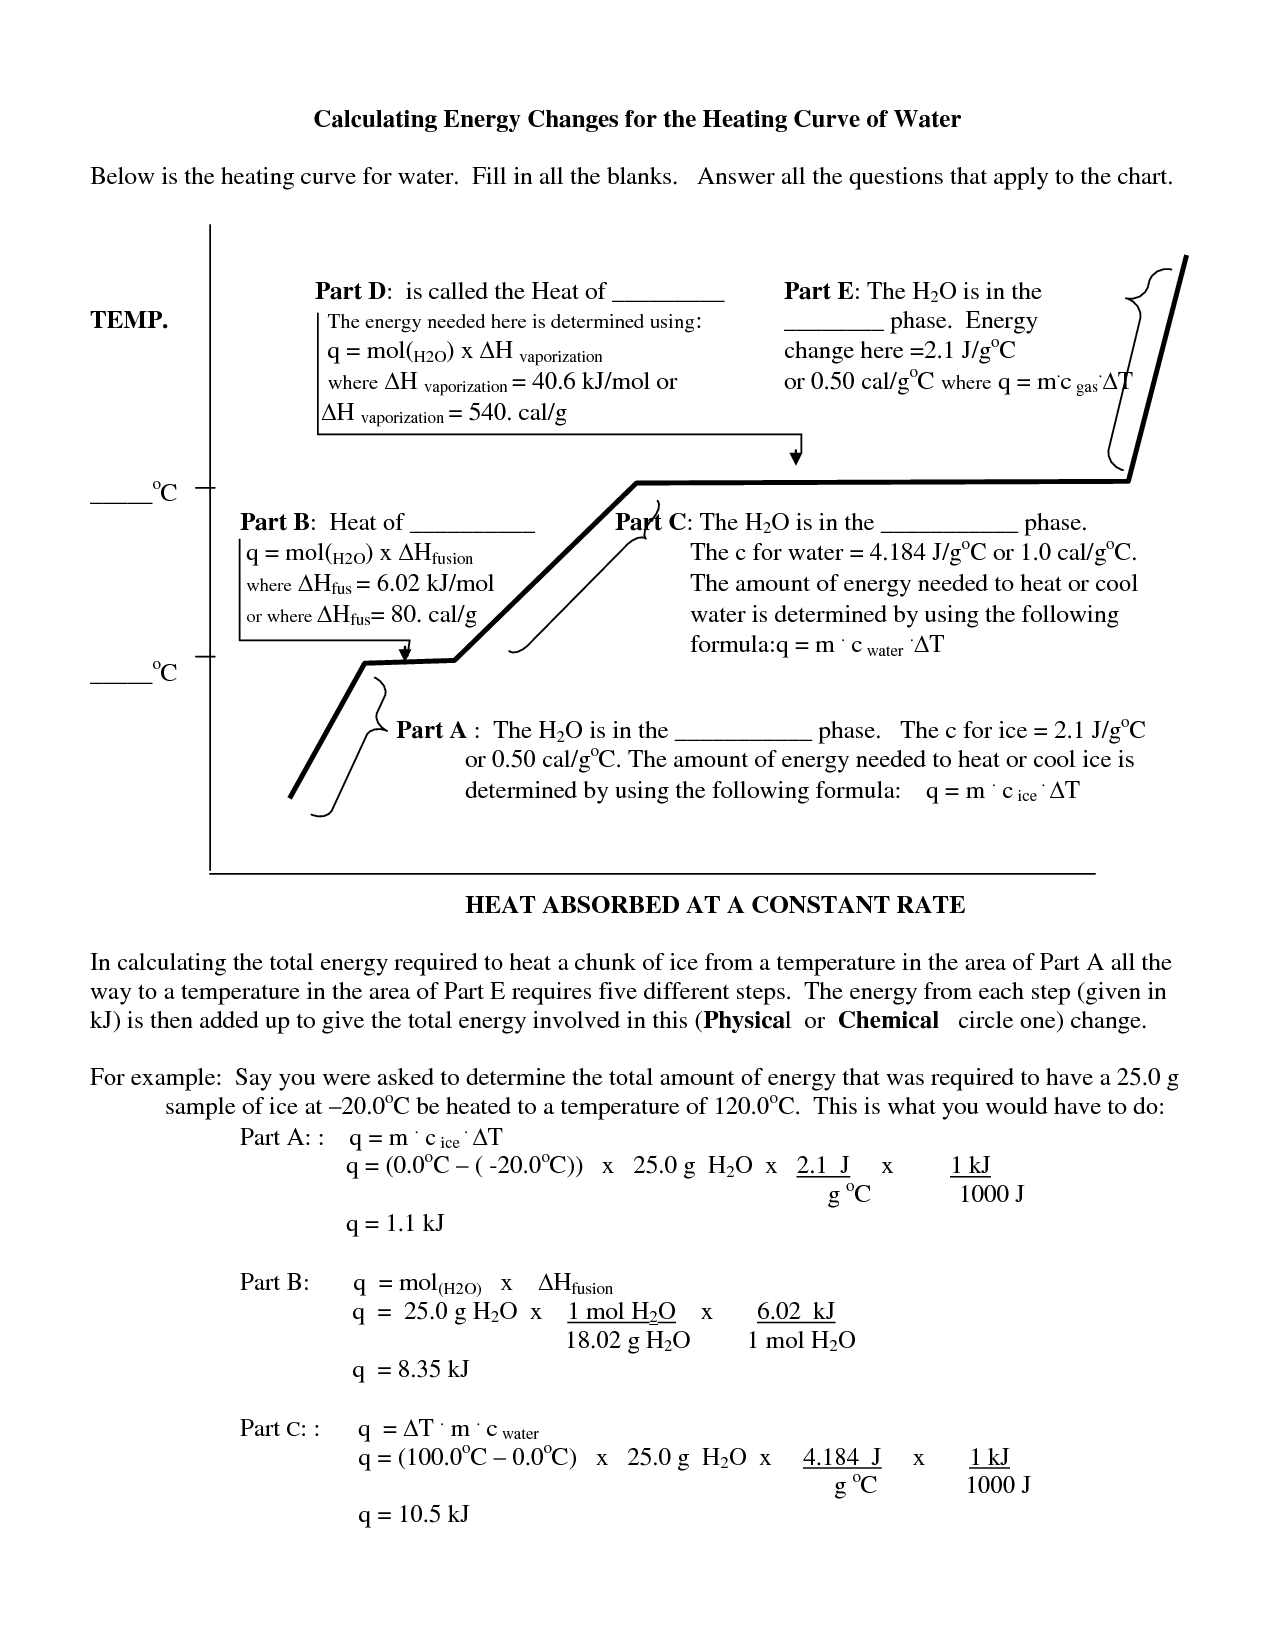 Heating Curve of Water Worksheet Answers